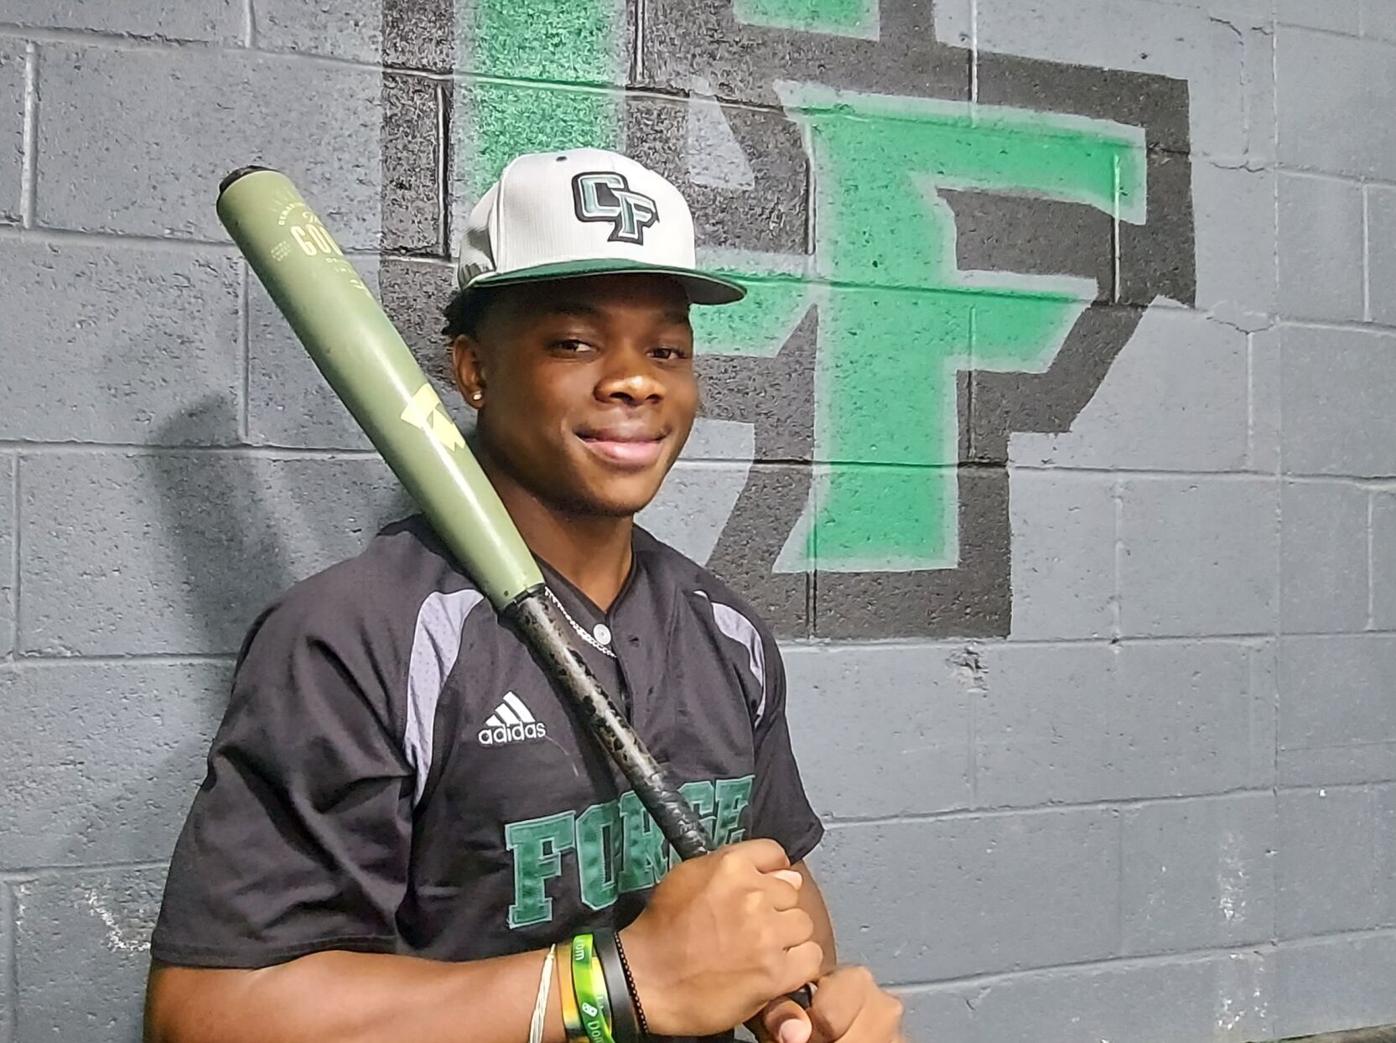 Colonial Forge baseball star and MLB draft prospect loves to lift